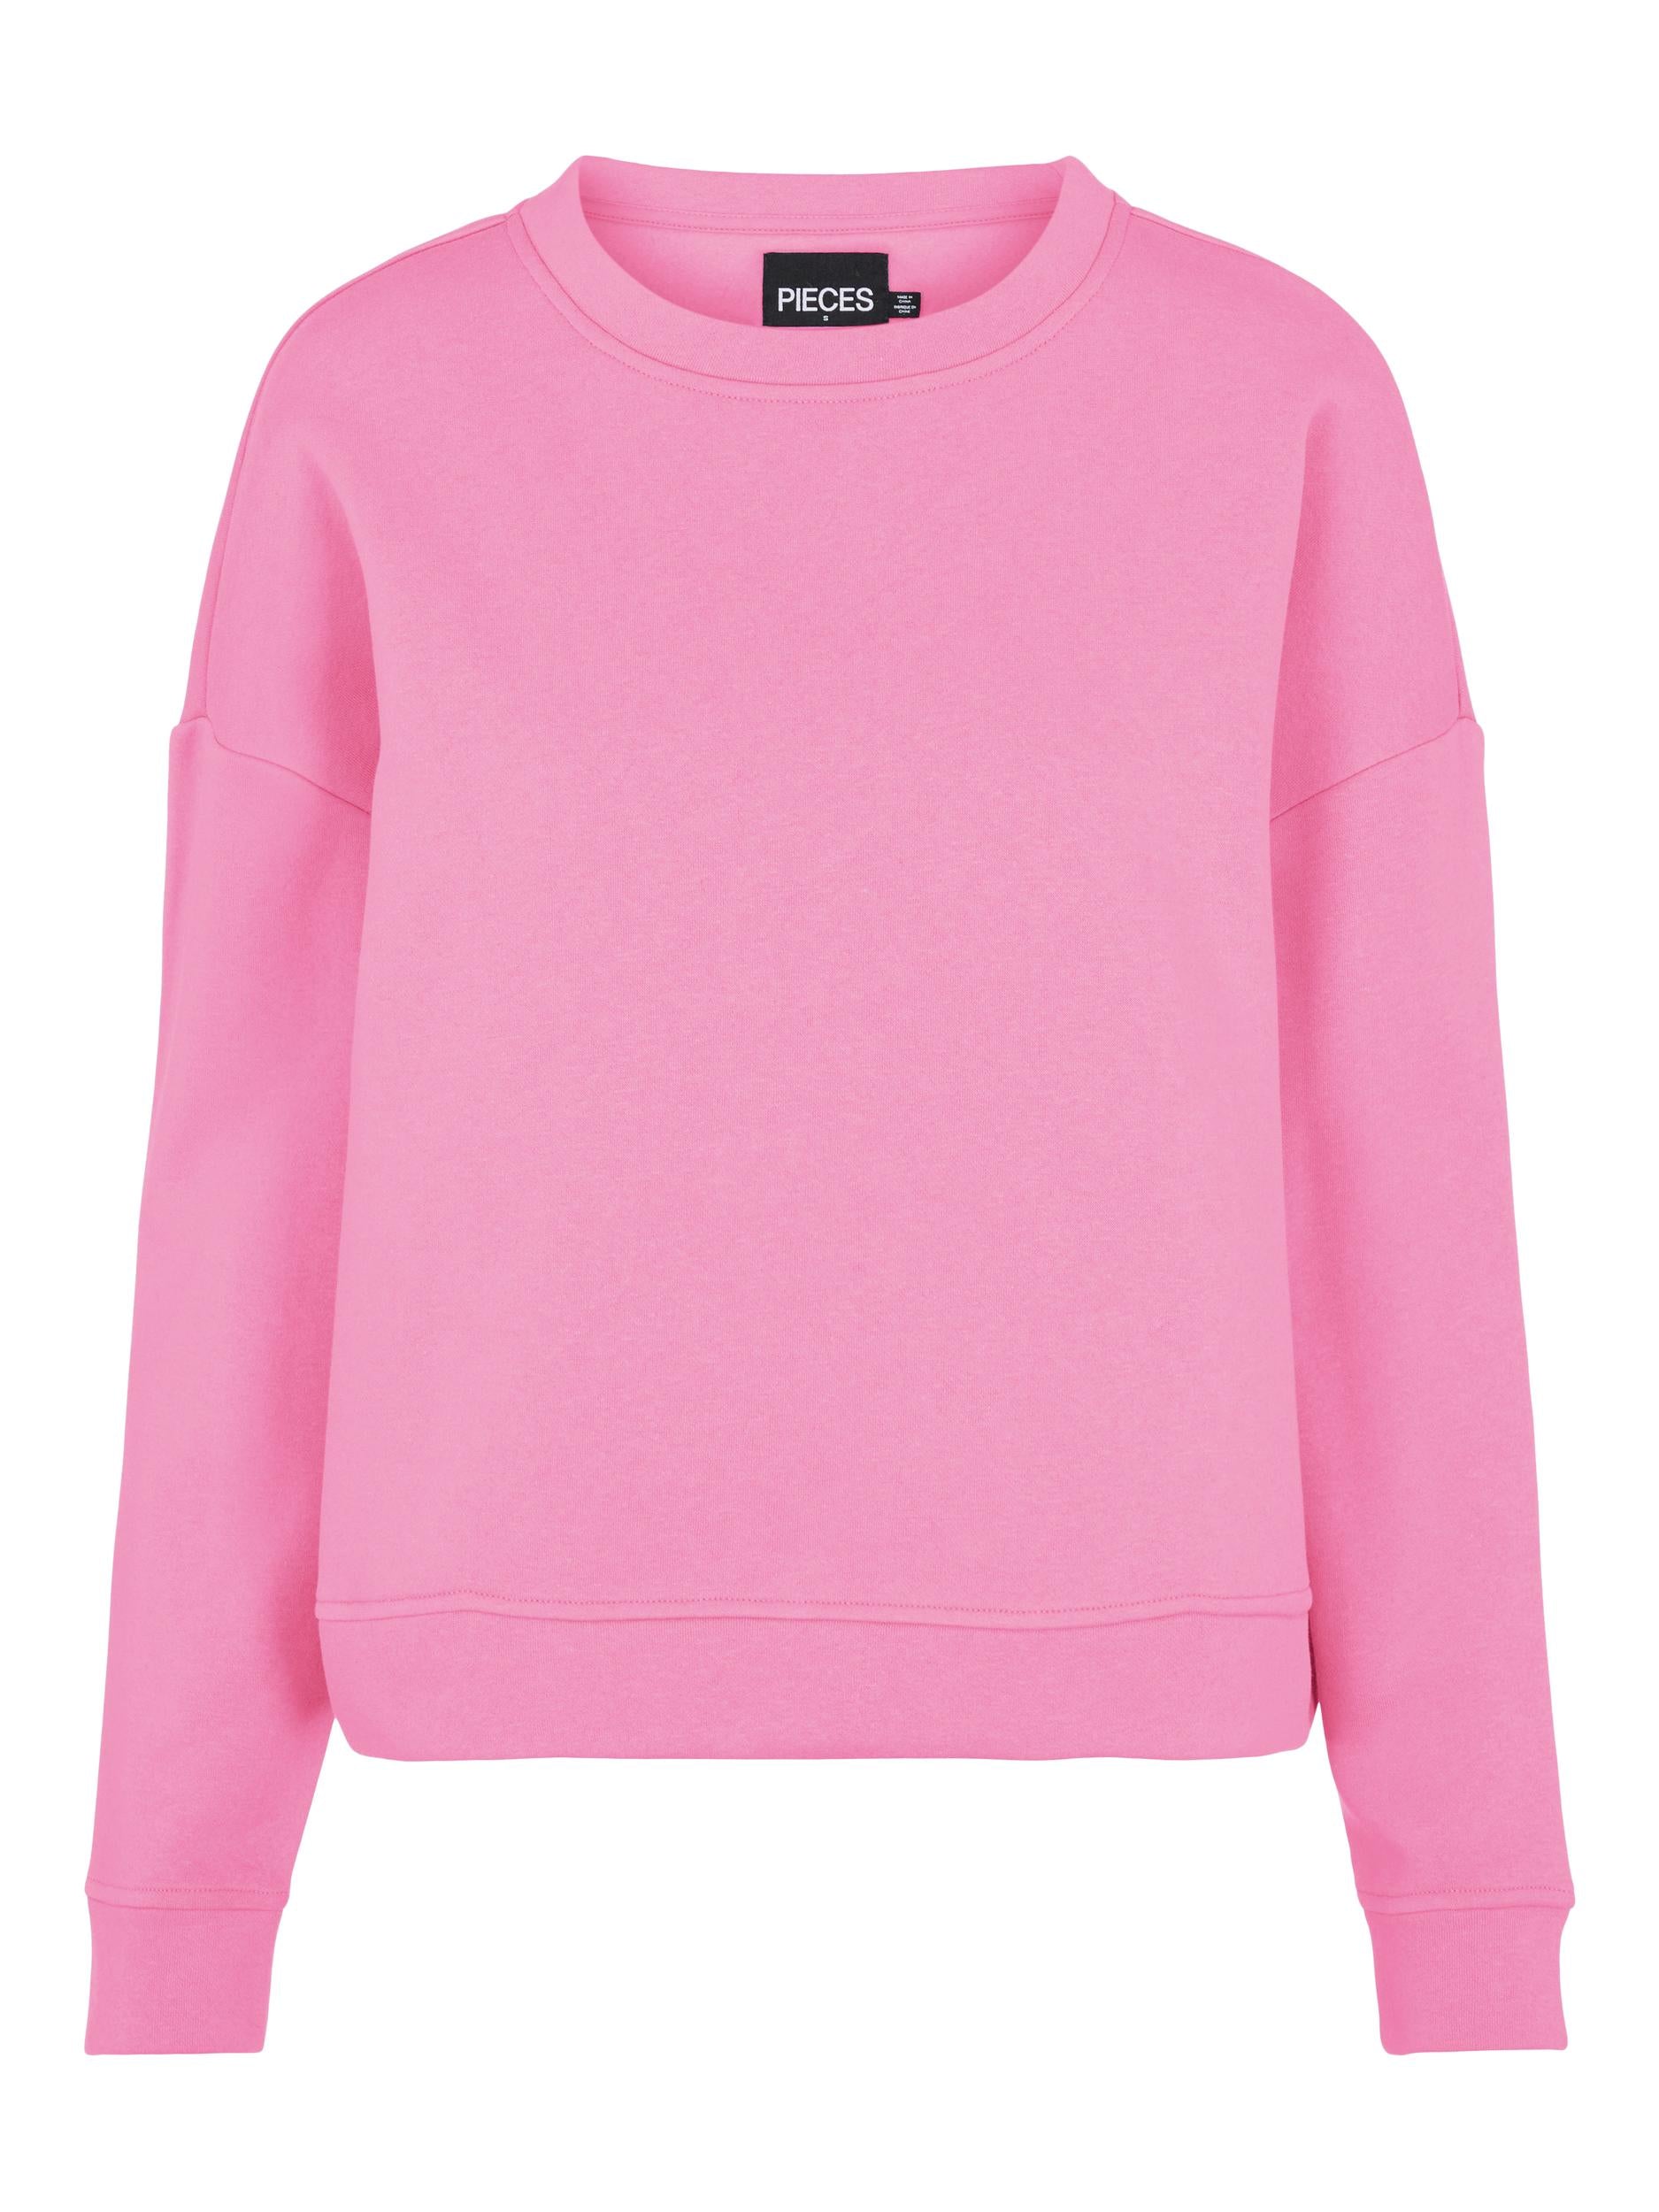 Pieces Chilli Sweat - pink